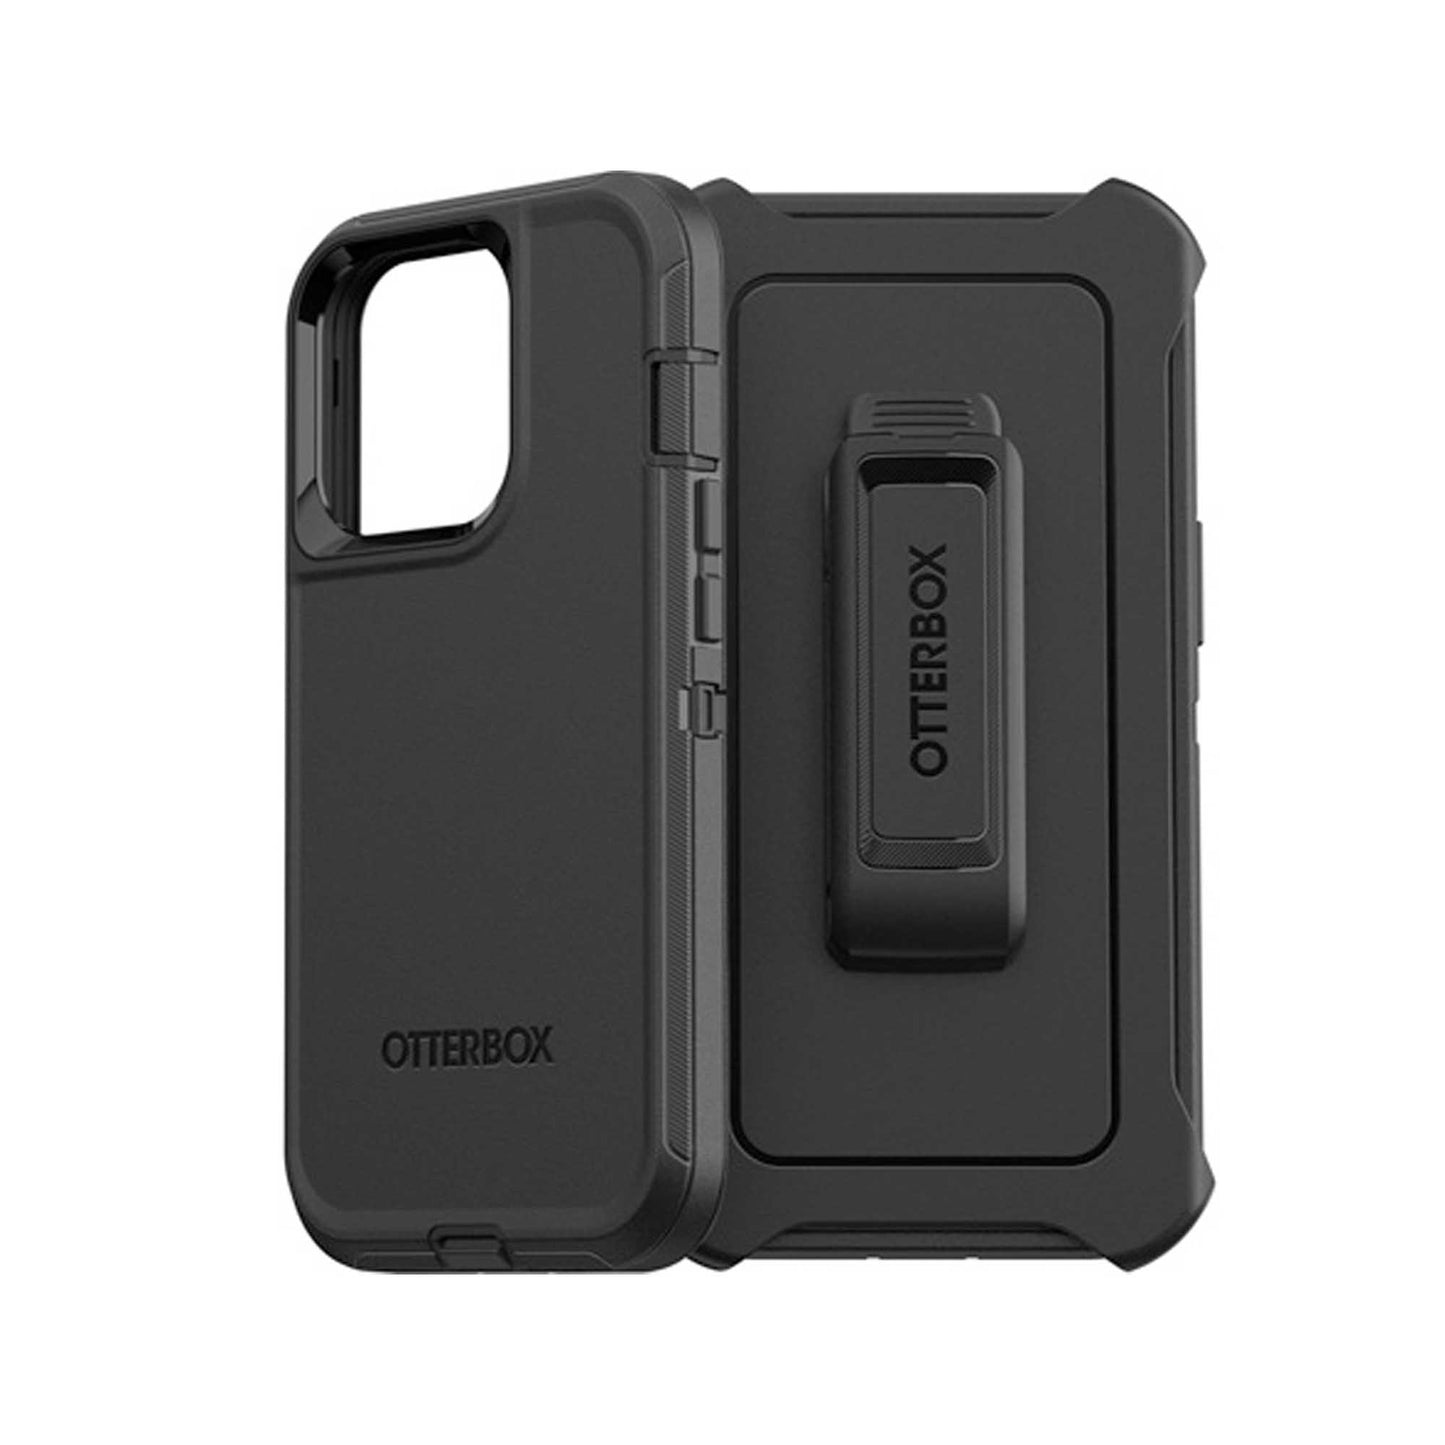 Otterbox Defender for iPhone 13 Pro Max 6.1" 5G - Black (Barcode: 840104264645)